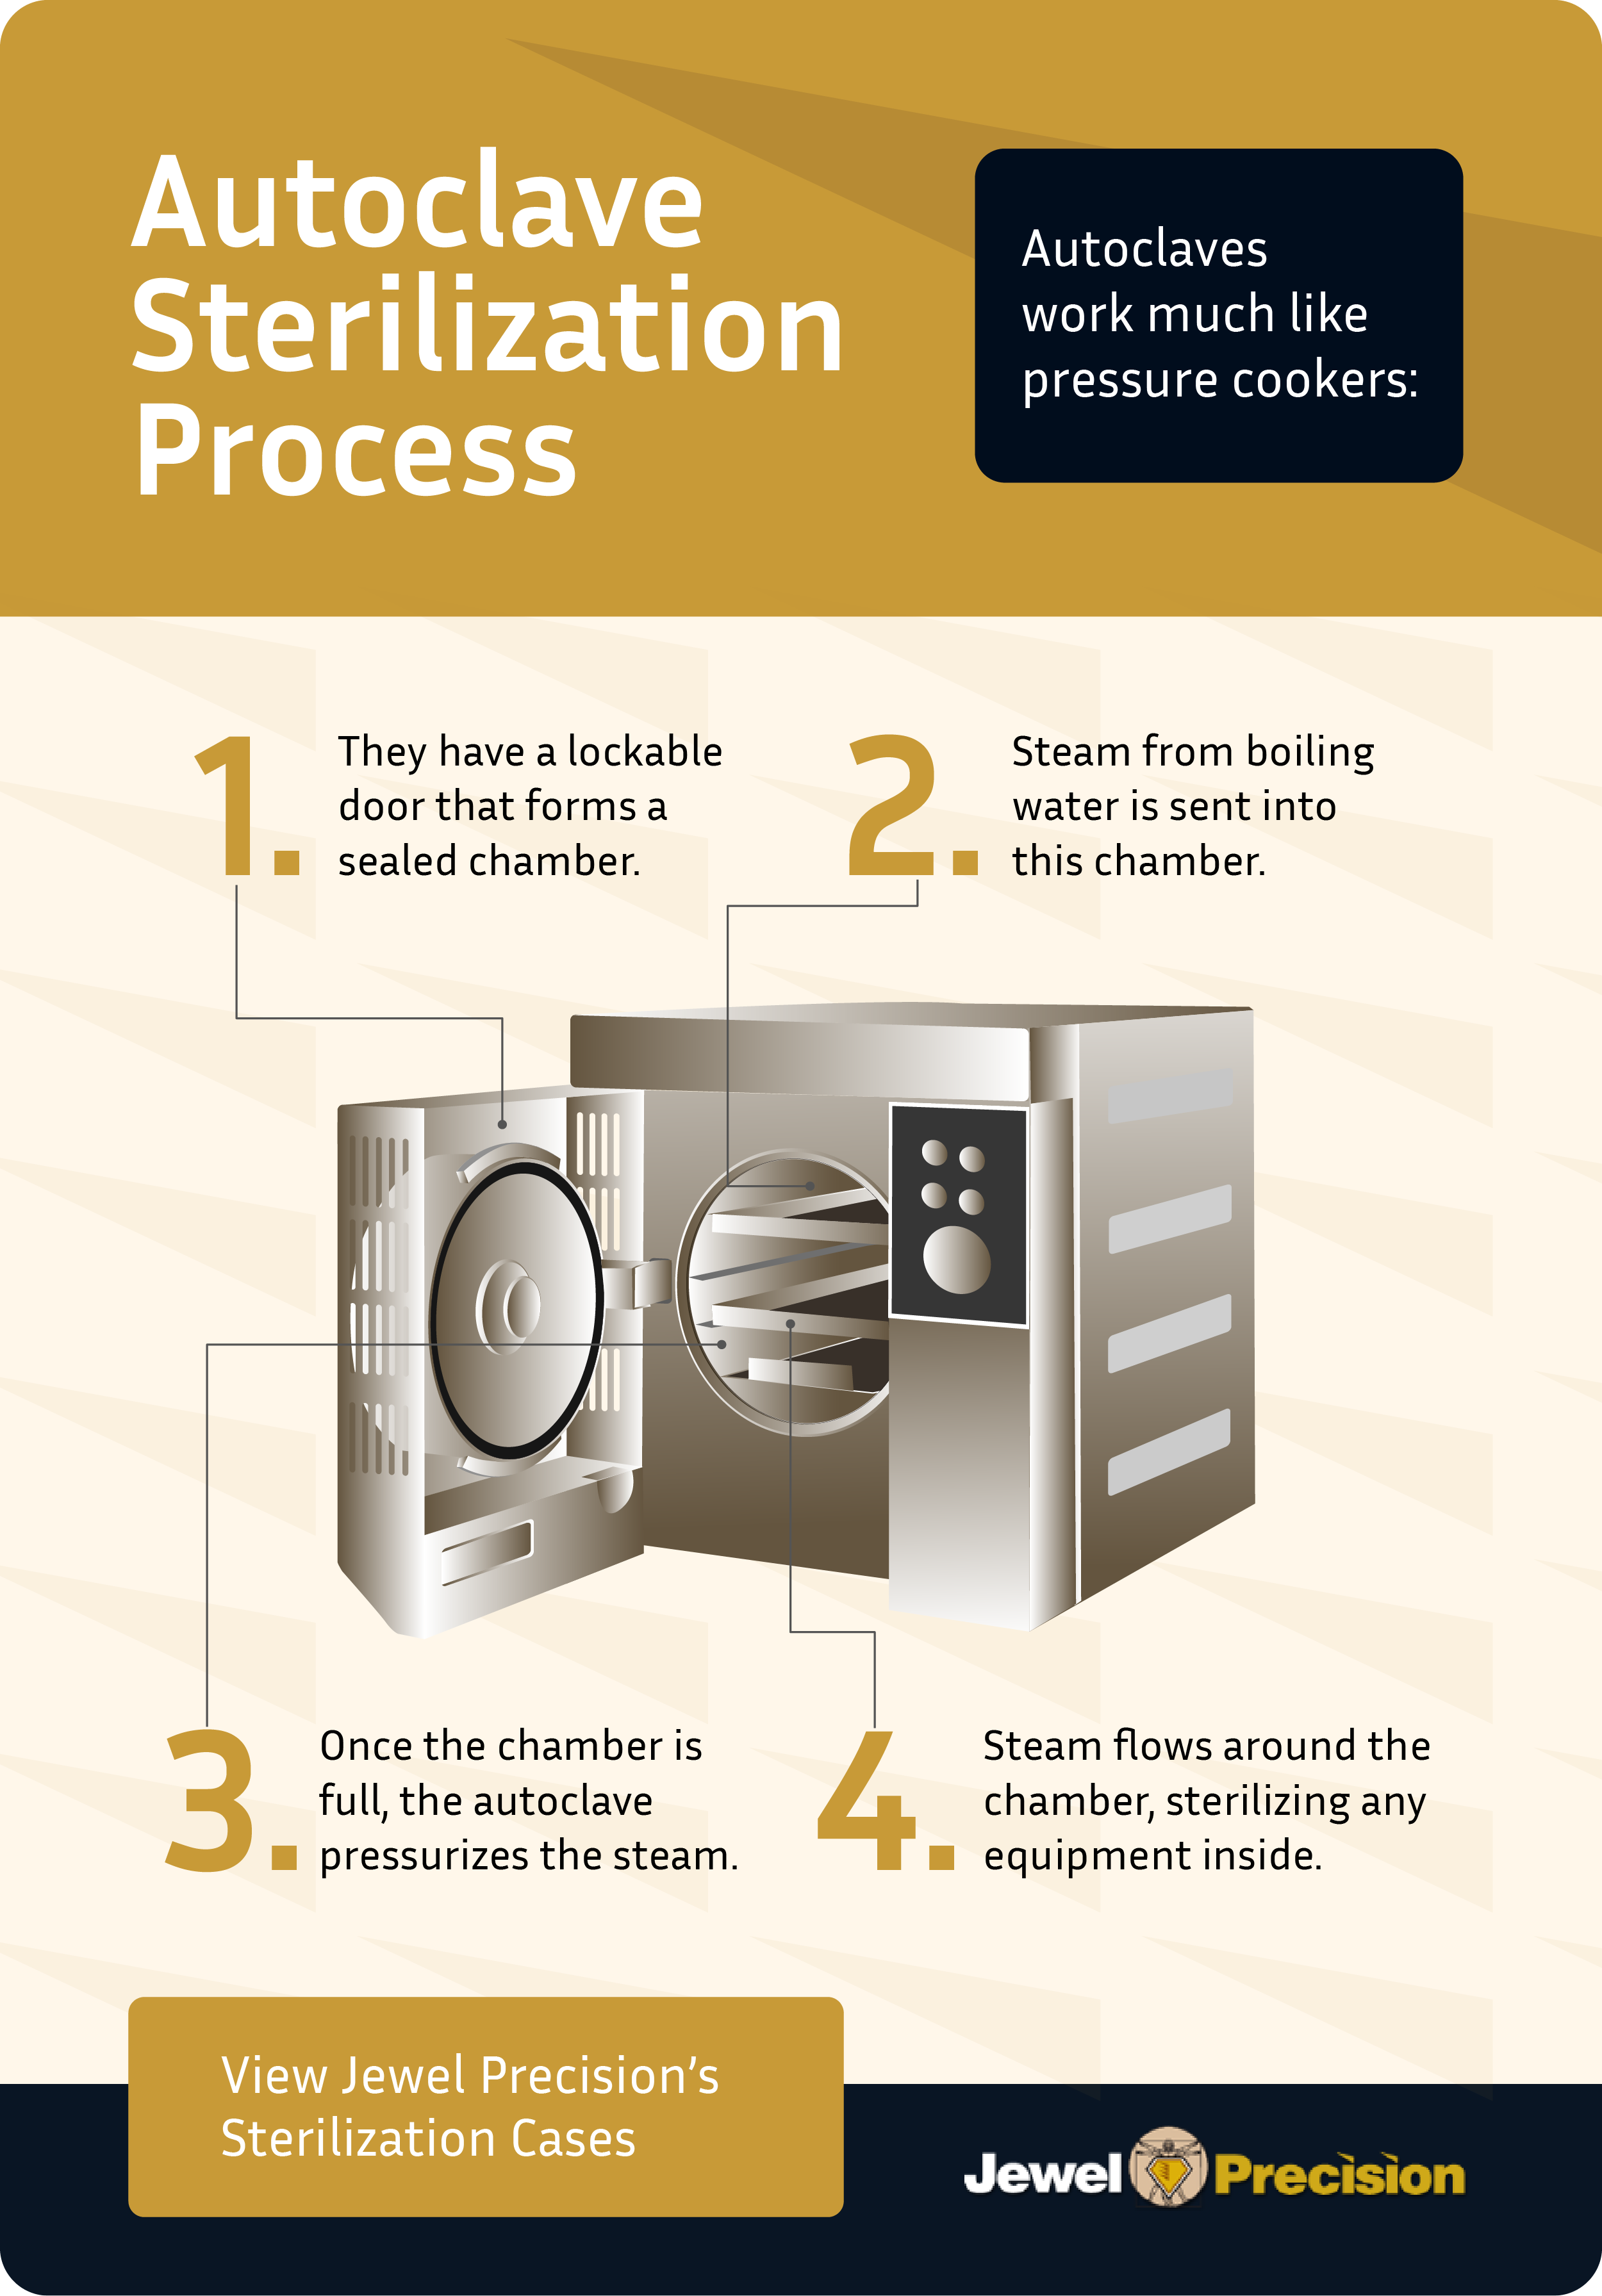 A micrographic outlines the autoclave sterilization process